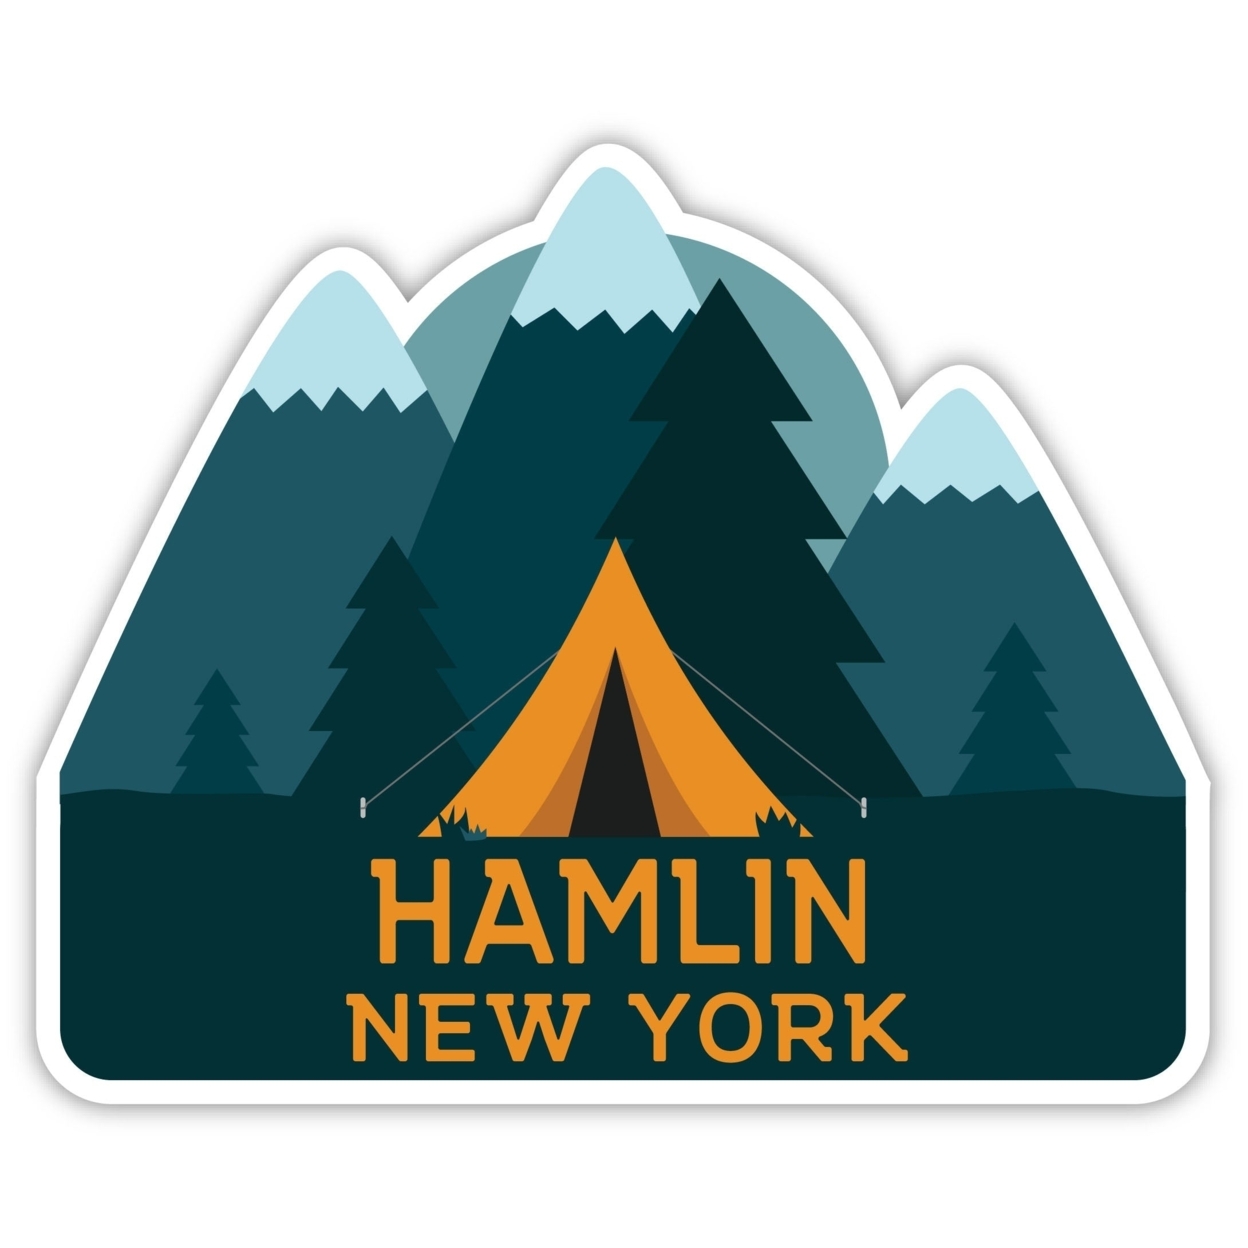 Hamlin New York Souvenir Decorative Stickers (Choose Theme And Size) - 4-Pack, 10-Inch, Tent